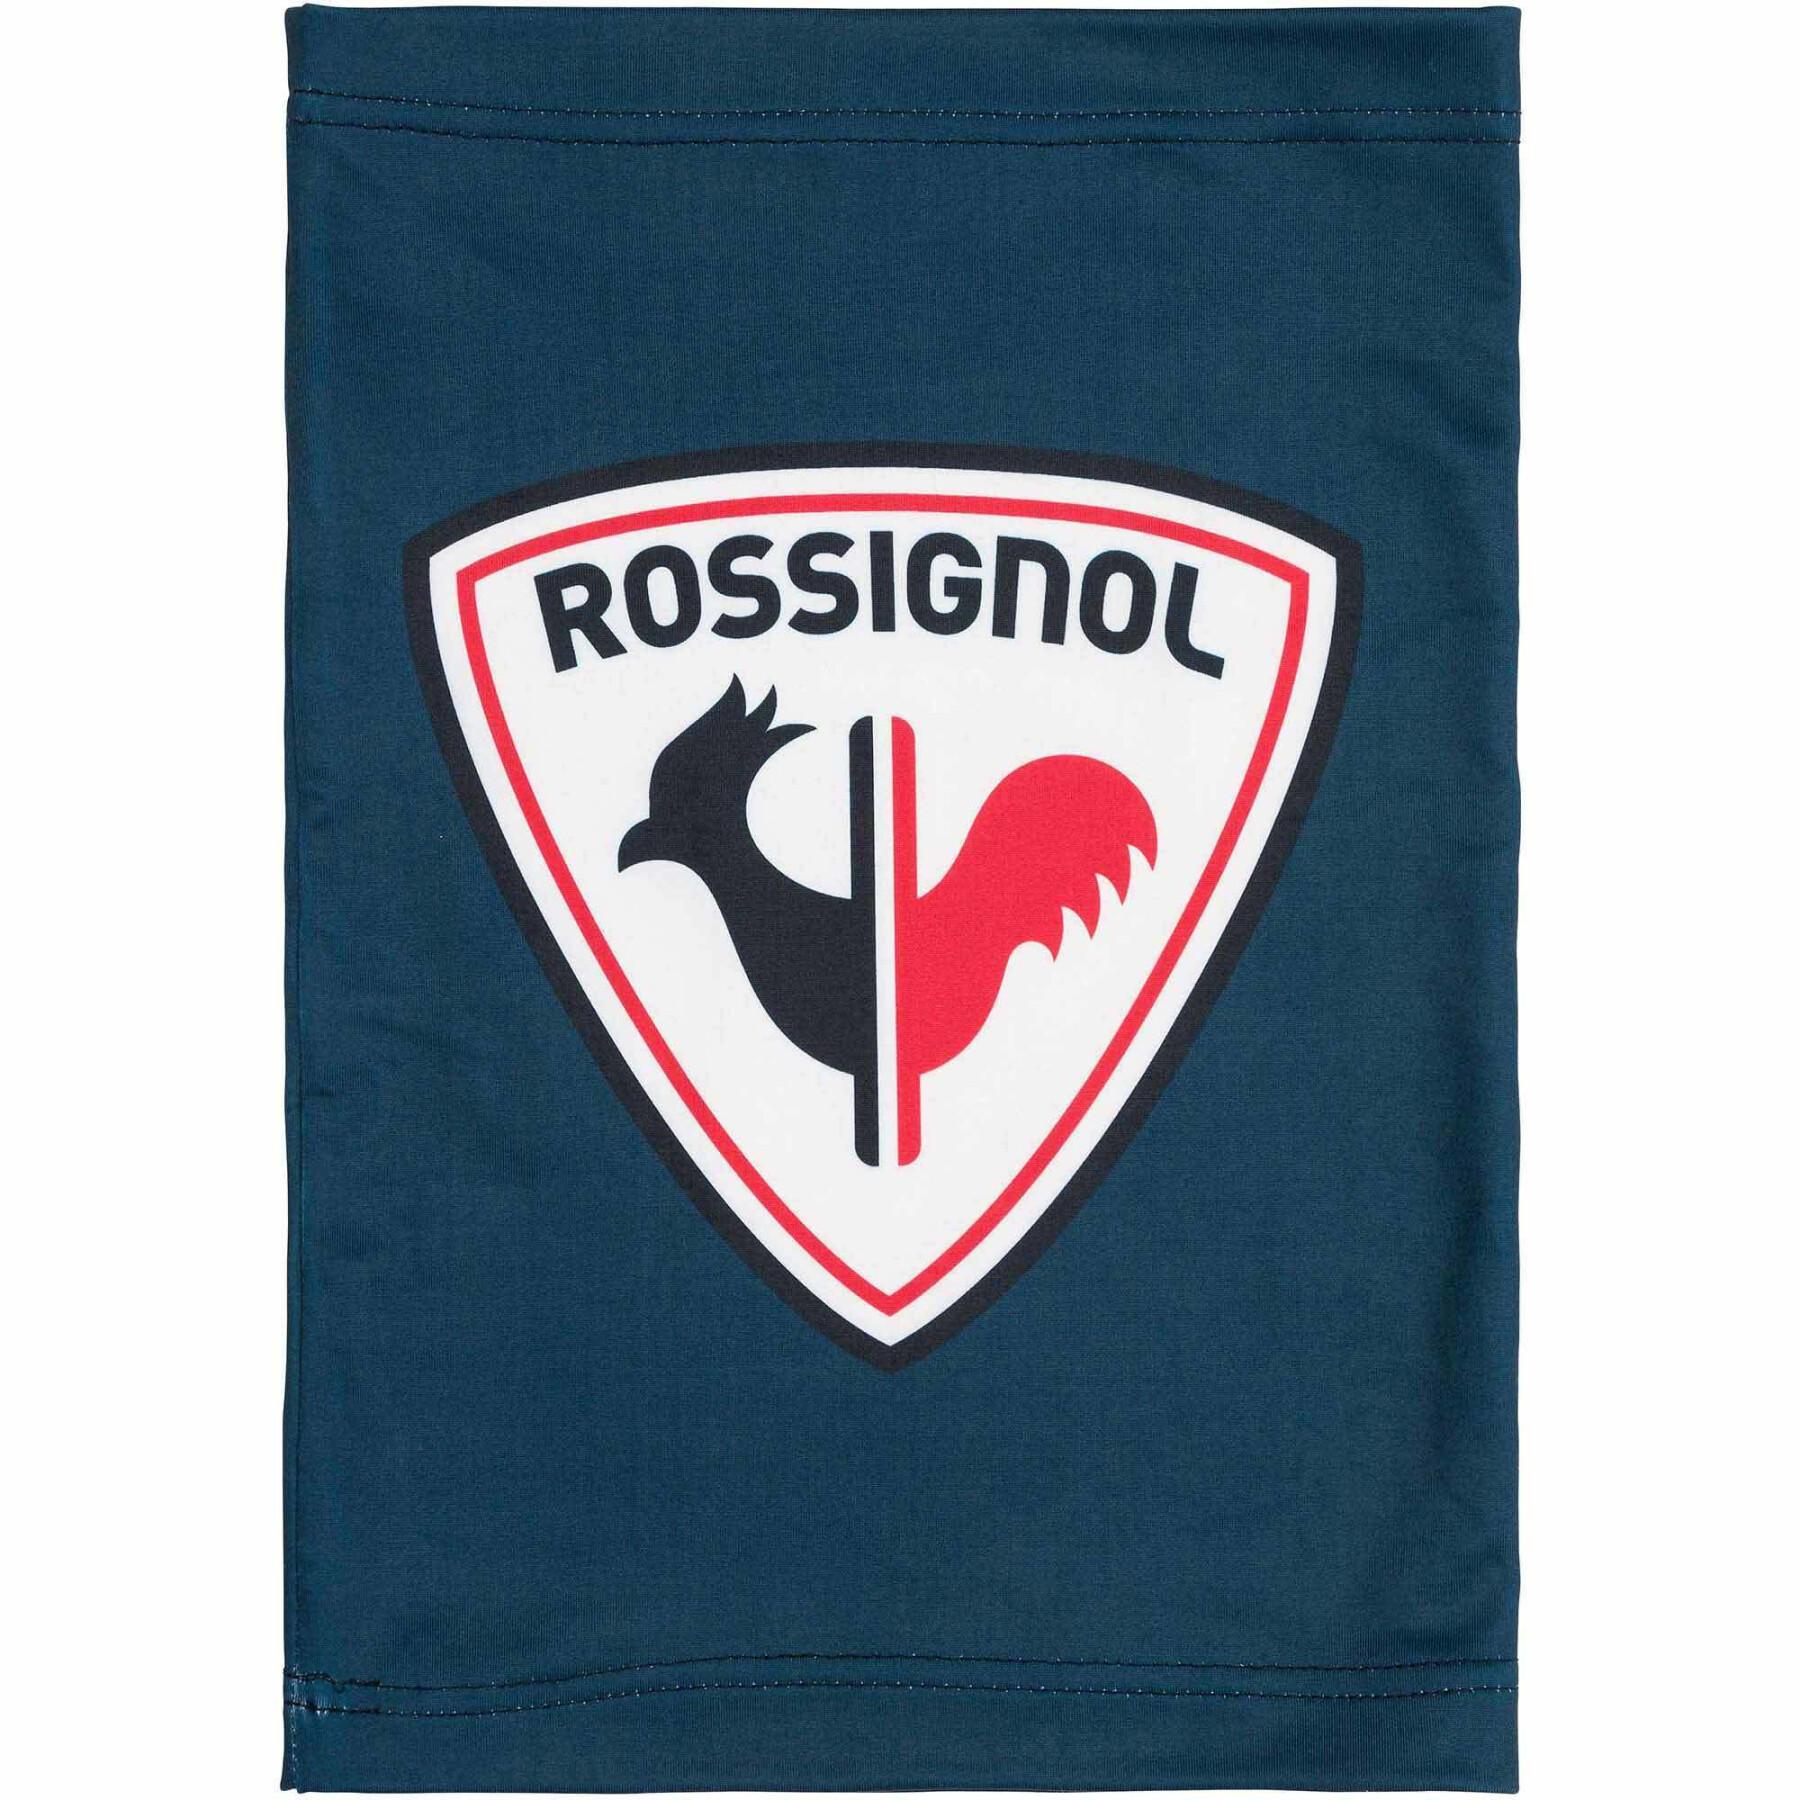 Halsketting Rossignol Rooster